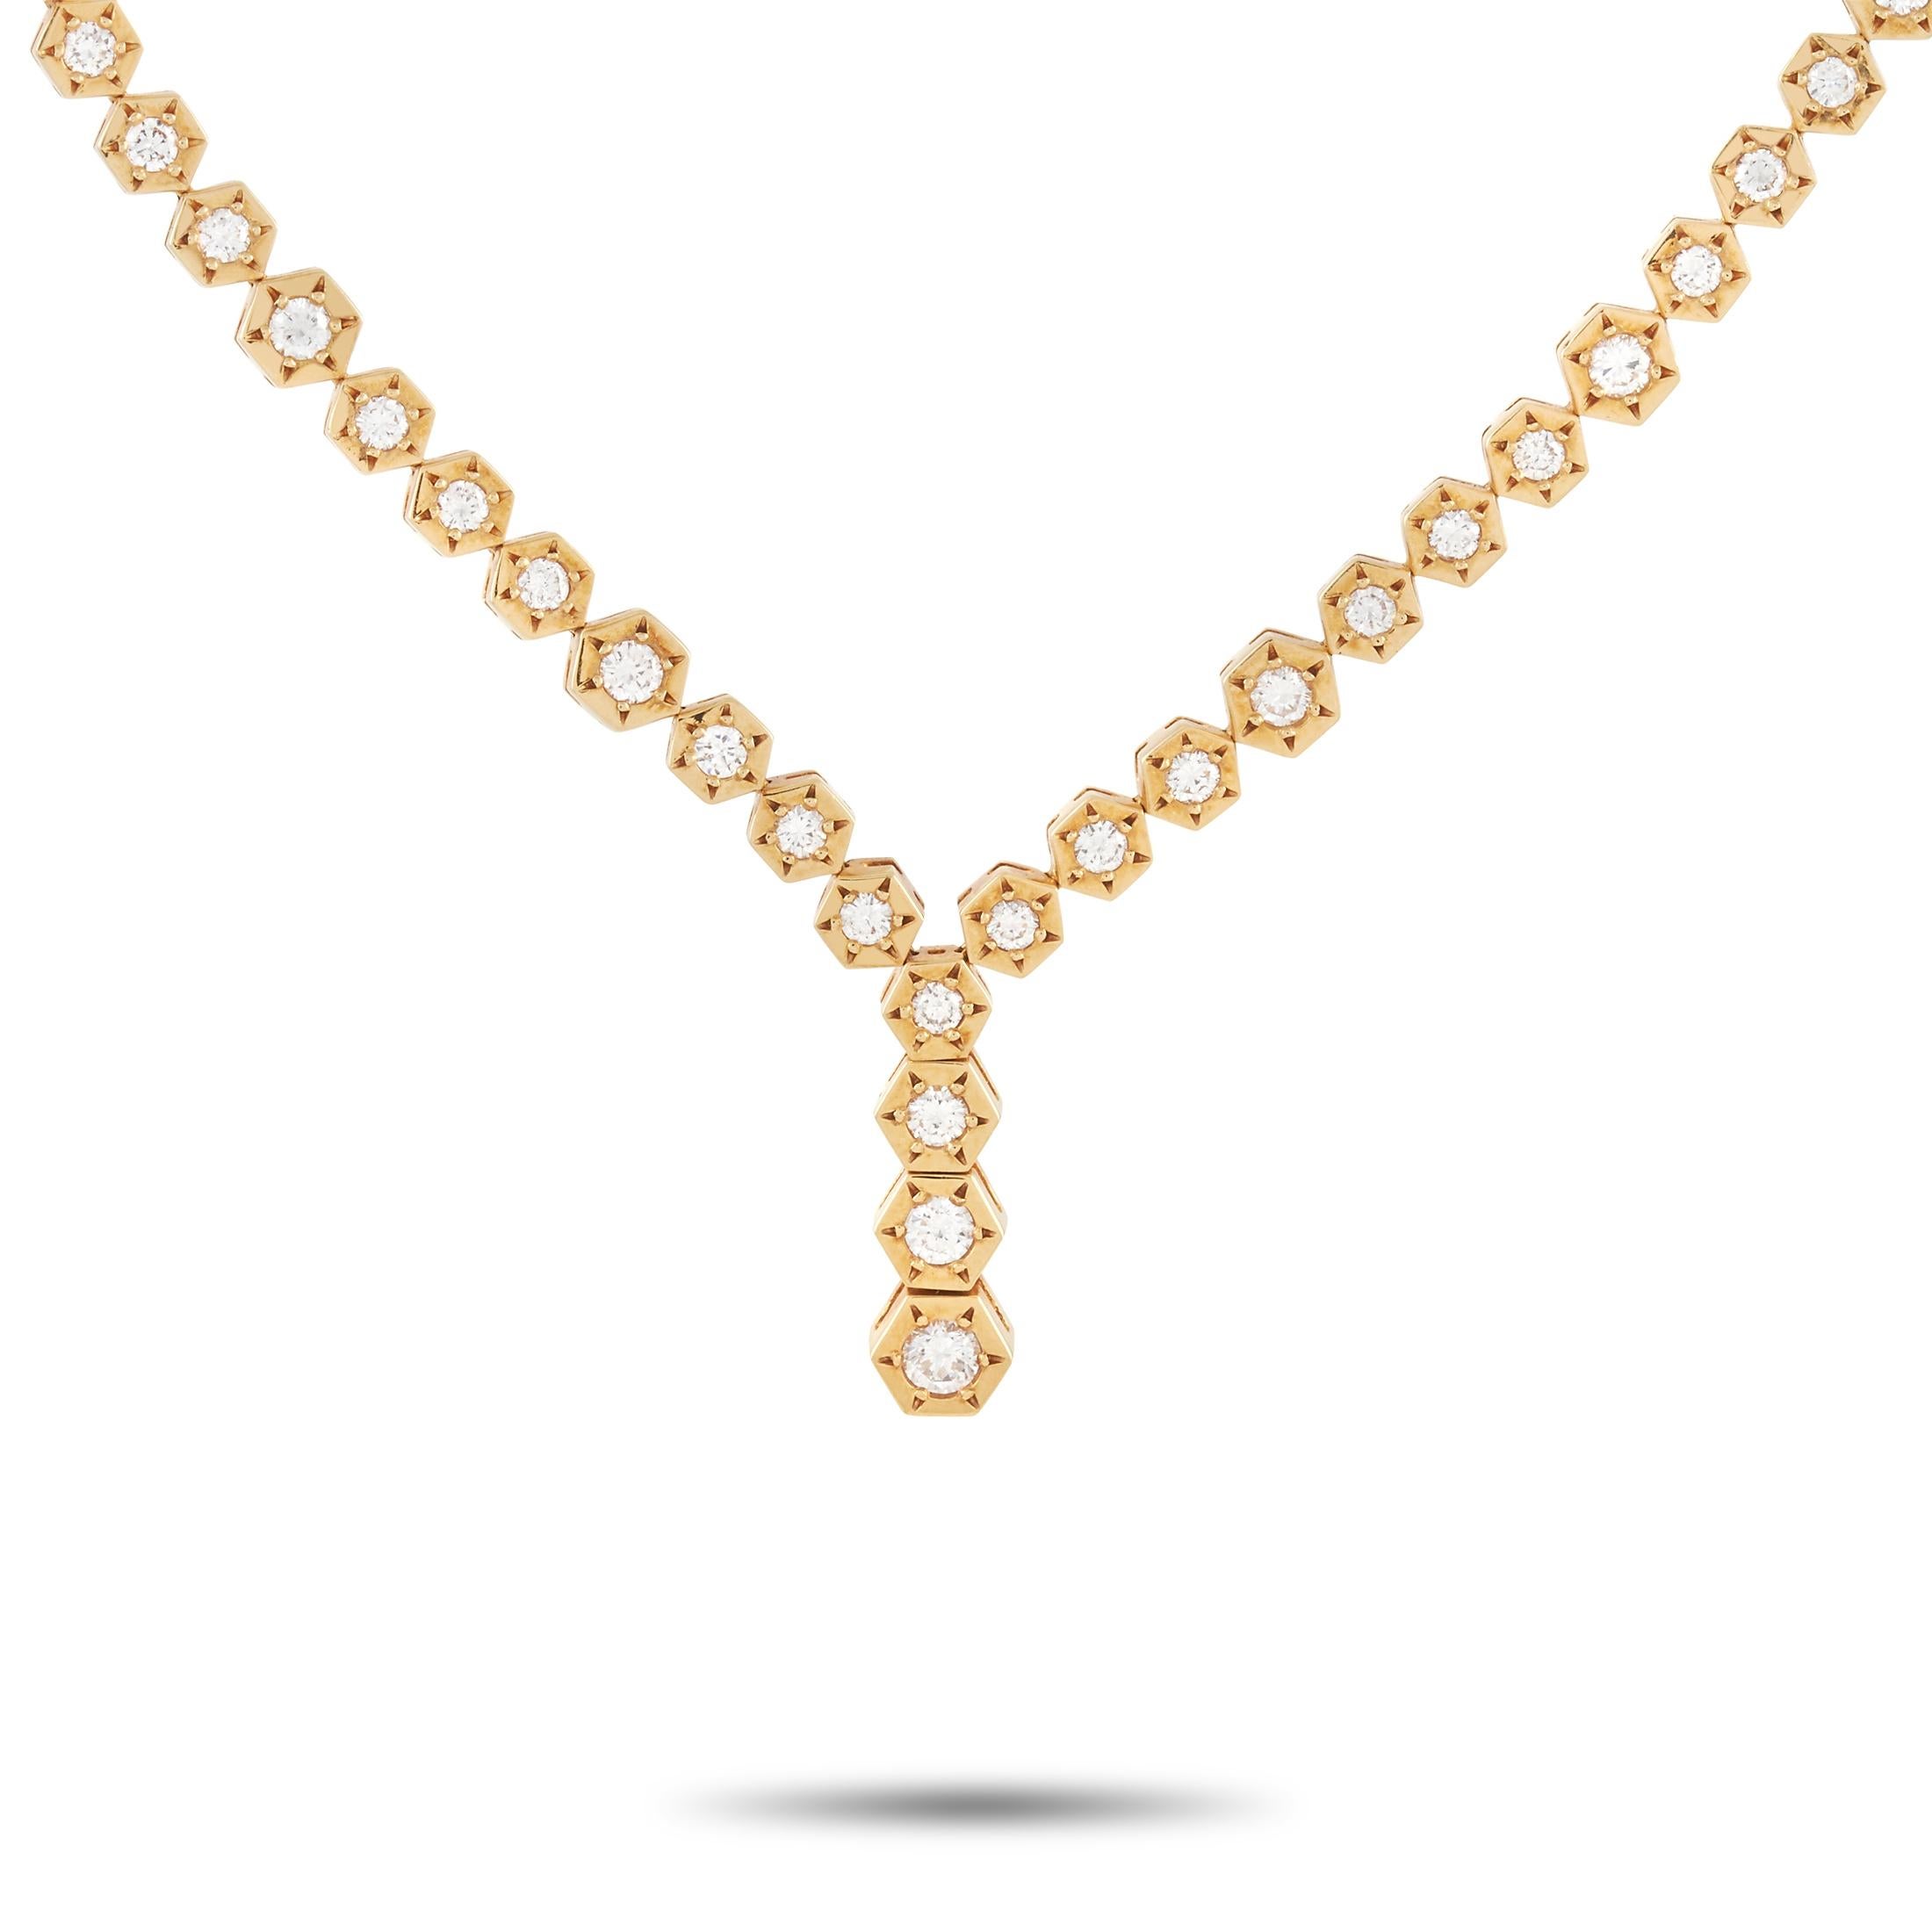 The Van Cleef & Arpels Vintage 18K Yellow Gold 3.46 ct Diamond Y Necklace is a unique necklace to be cherished for years. This piece is made up of hexagonal links in 18K yellow gold forming a Y-shaped necklace. A total of 3.46 carats of E-VVS